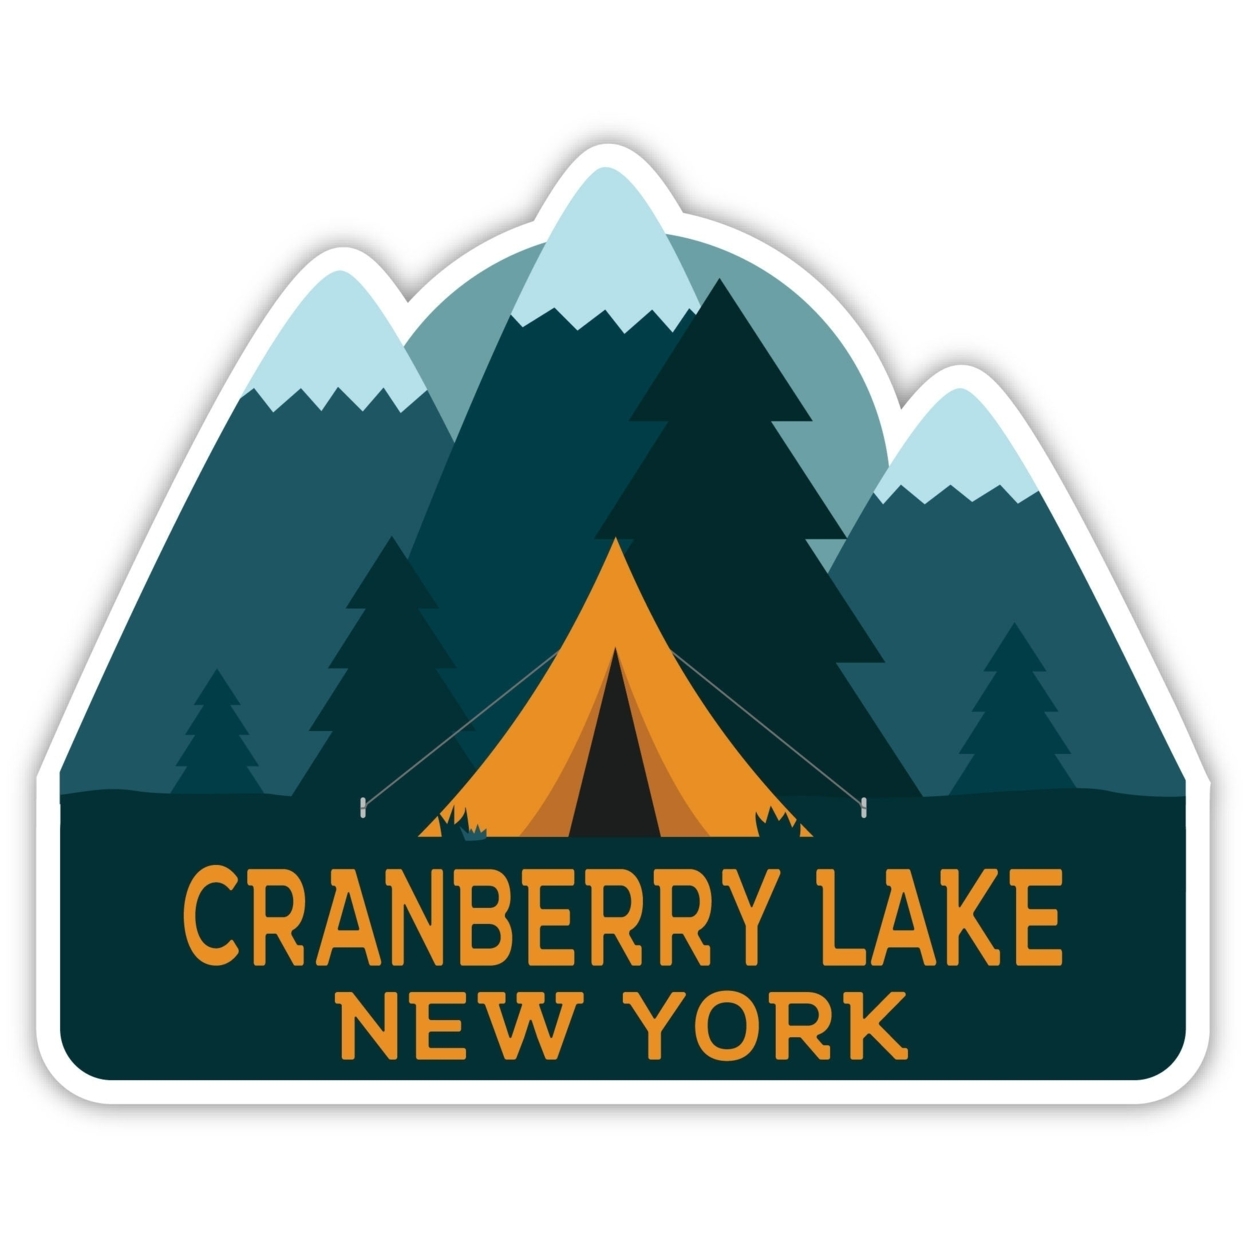 Cranberry Lake New York Souvenir Decorative Stickers (Choose Theme And Size) - 4-Pack, 10-Inch, Adventures Awaits